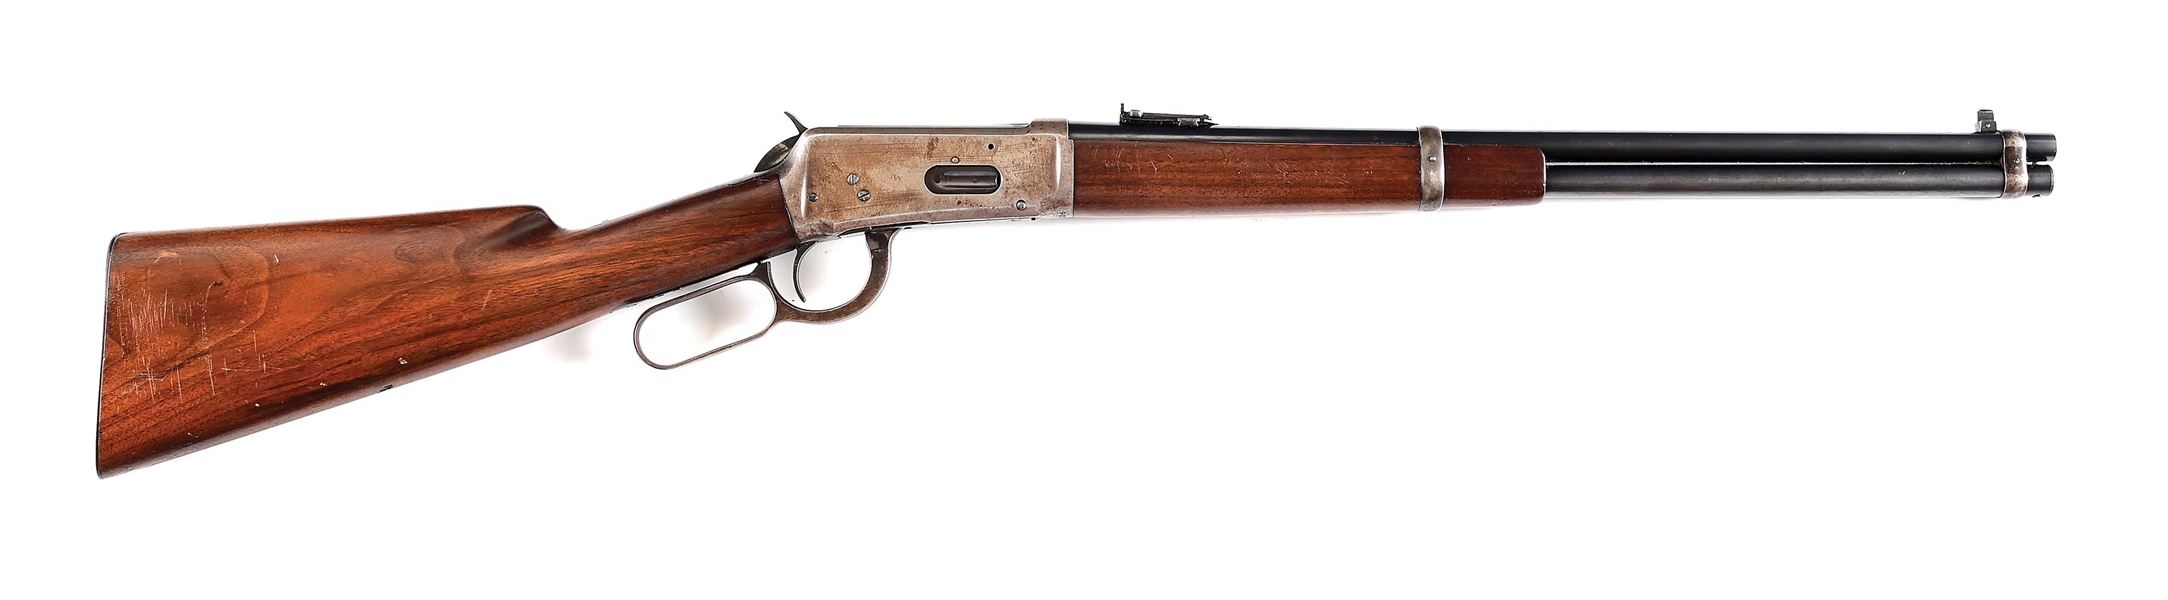 (C) WINCHESTER 1894 LEVER ACTION RIFLE IN .30 WCF OWNED BY TOM RYNNING, A ROUGH RIDER AT SAN JUAN HILL, CAPTAIN OF THE ARIZONA RANGERS, AND U.S. MARSHAL.